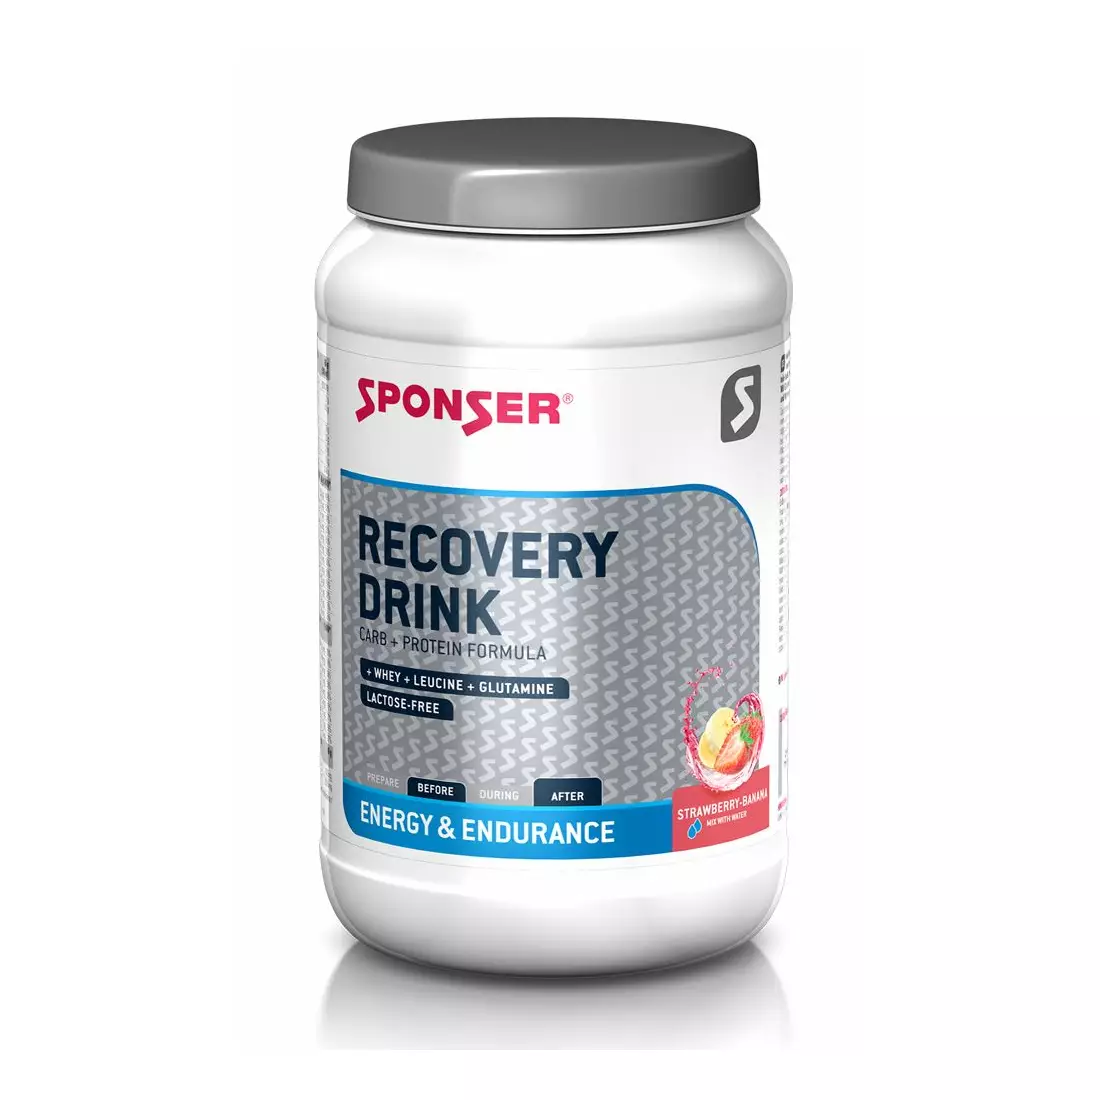 Drink SPONSER RECOVERY DRINK strawberry-banana can 1200g